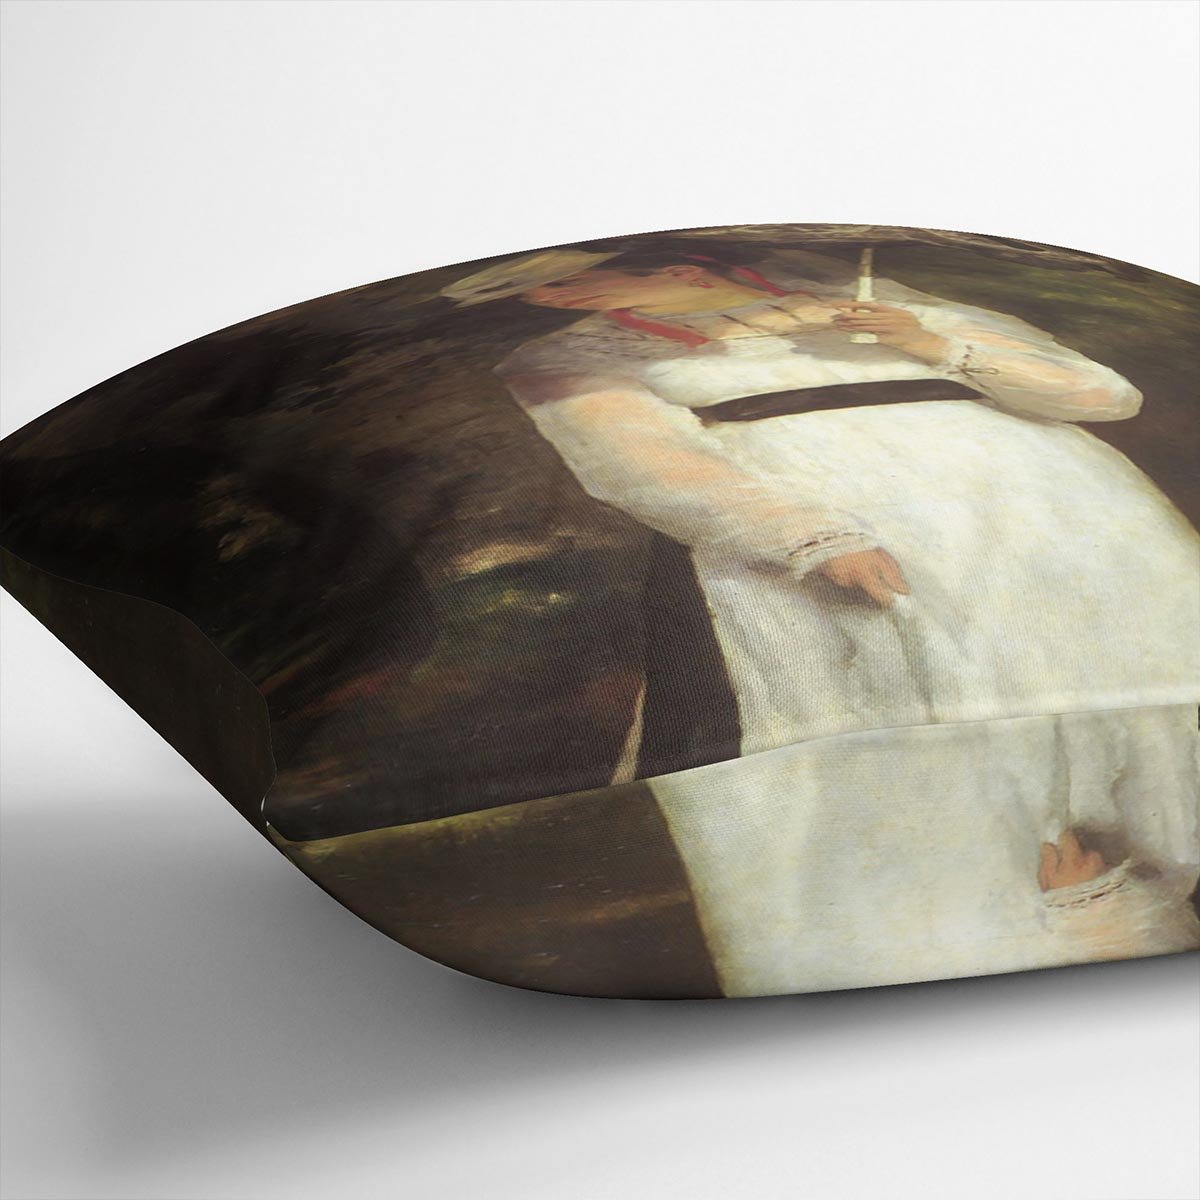 Lise with an Umbrella by Renoir Throw Pillow